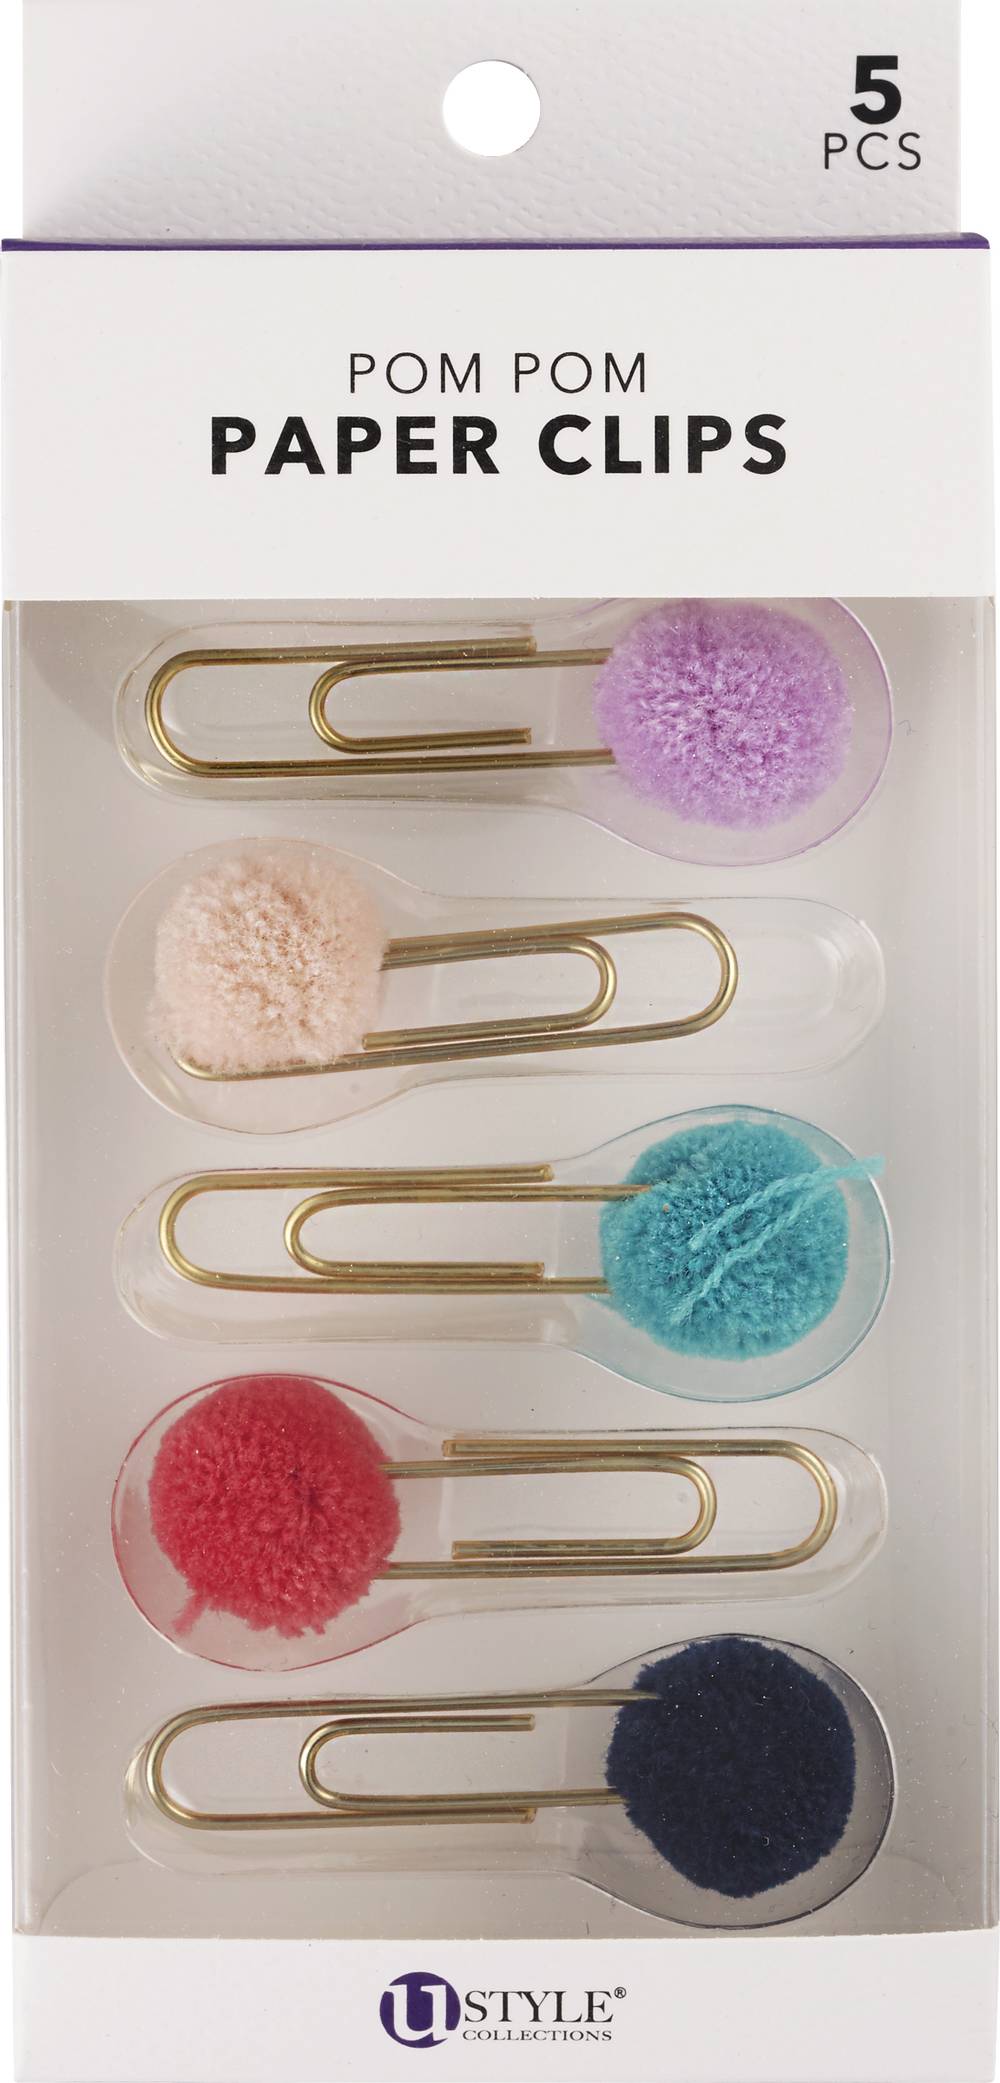 U Style Collections Pom Pom Paper Clips (assorted)